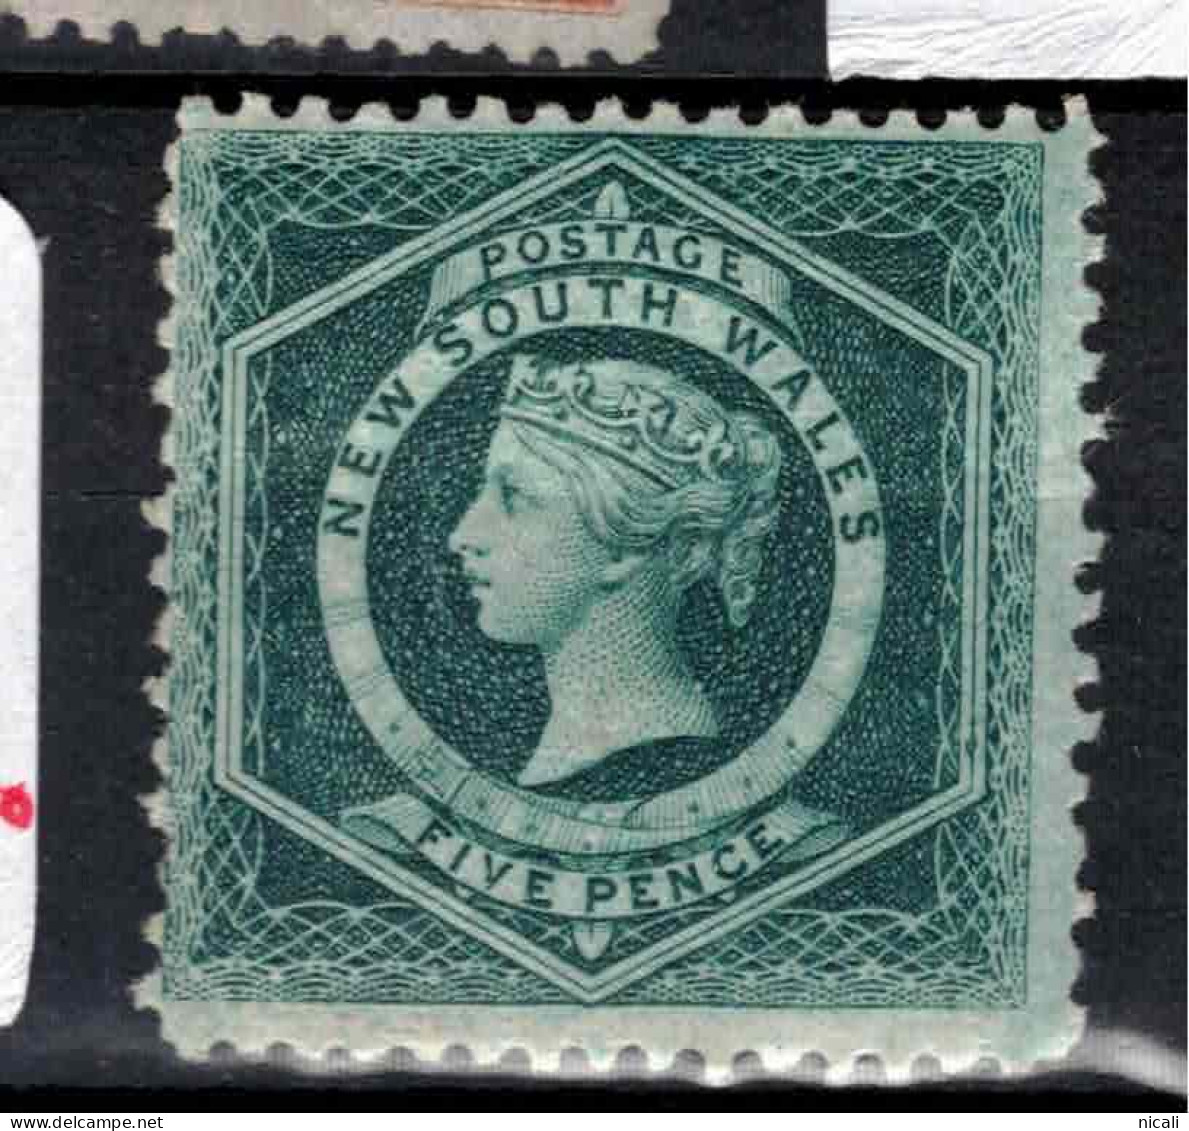 NSW 1882 5d Bluish Green P12 SG 215a LHM #CEP13 - Mint Stamps